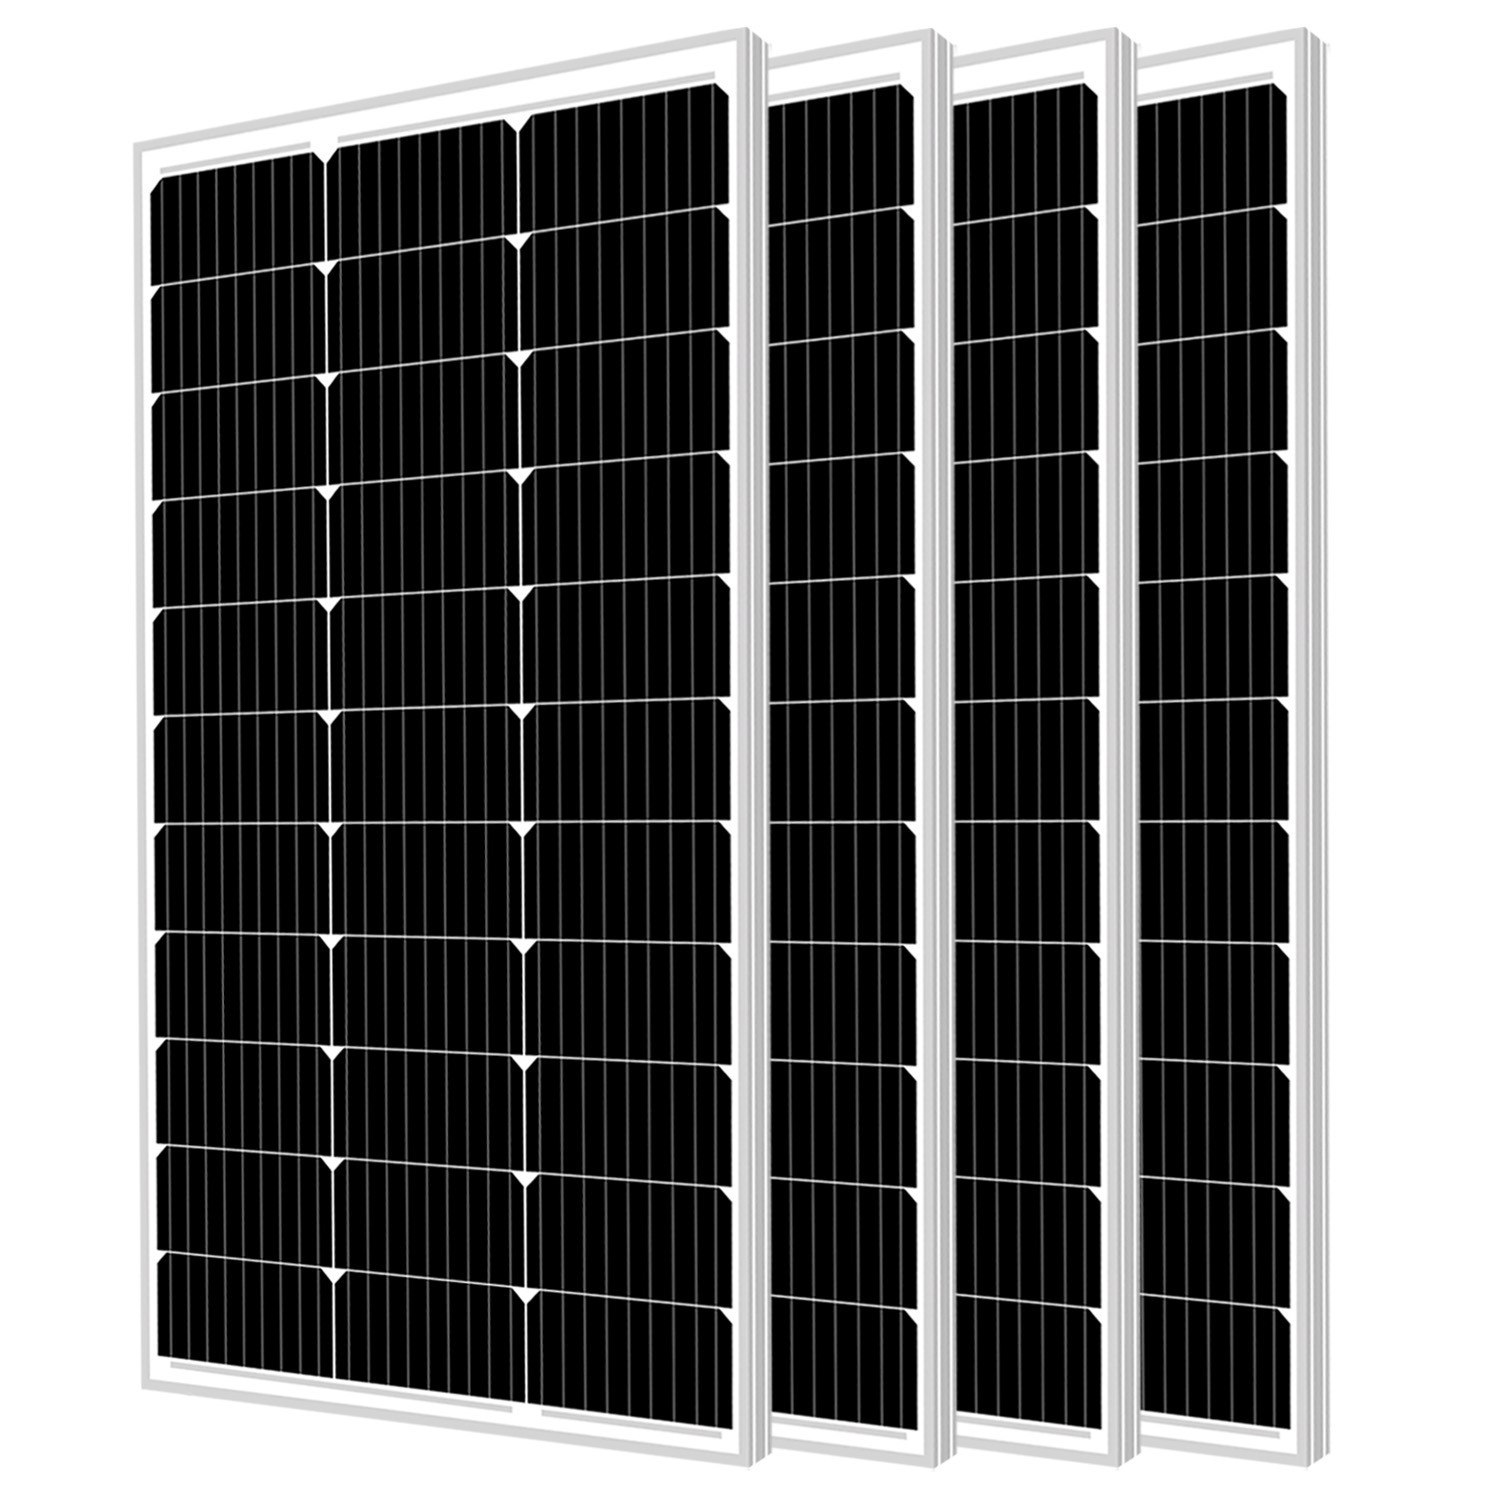 100W Solar Panel 12V Mono Off Grid Battery Charger for Motorhomes Trailers - 4 Pack